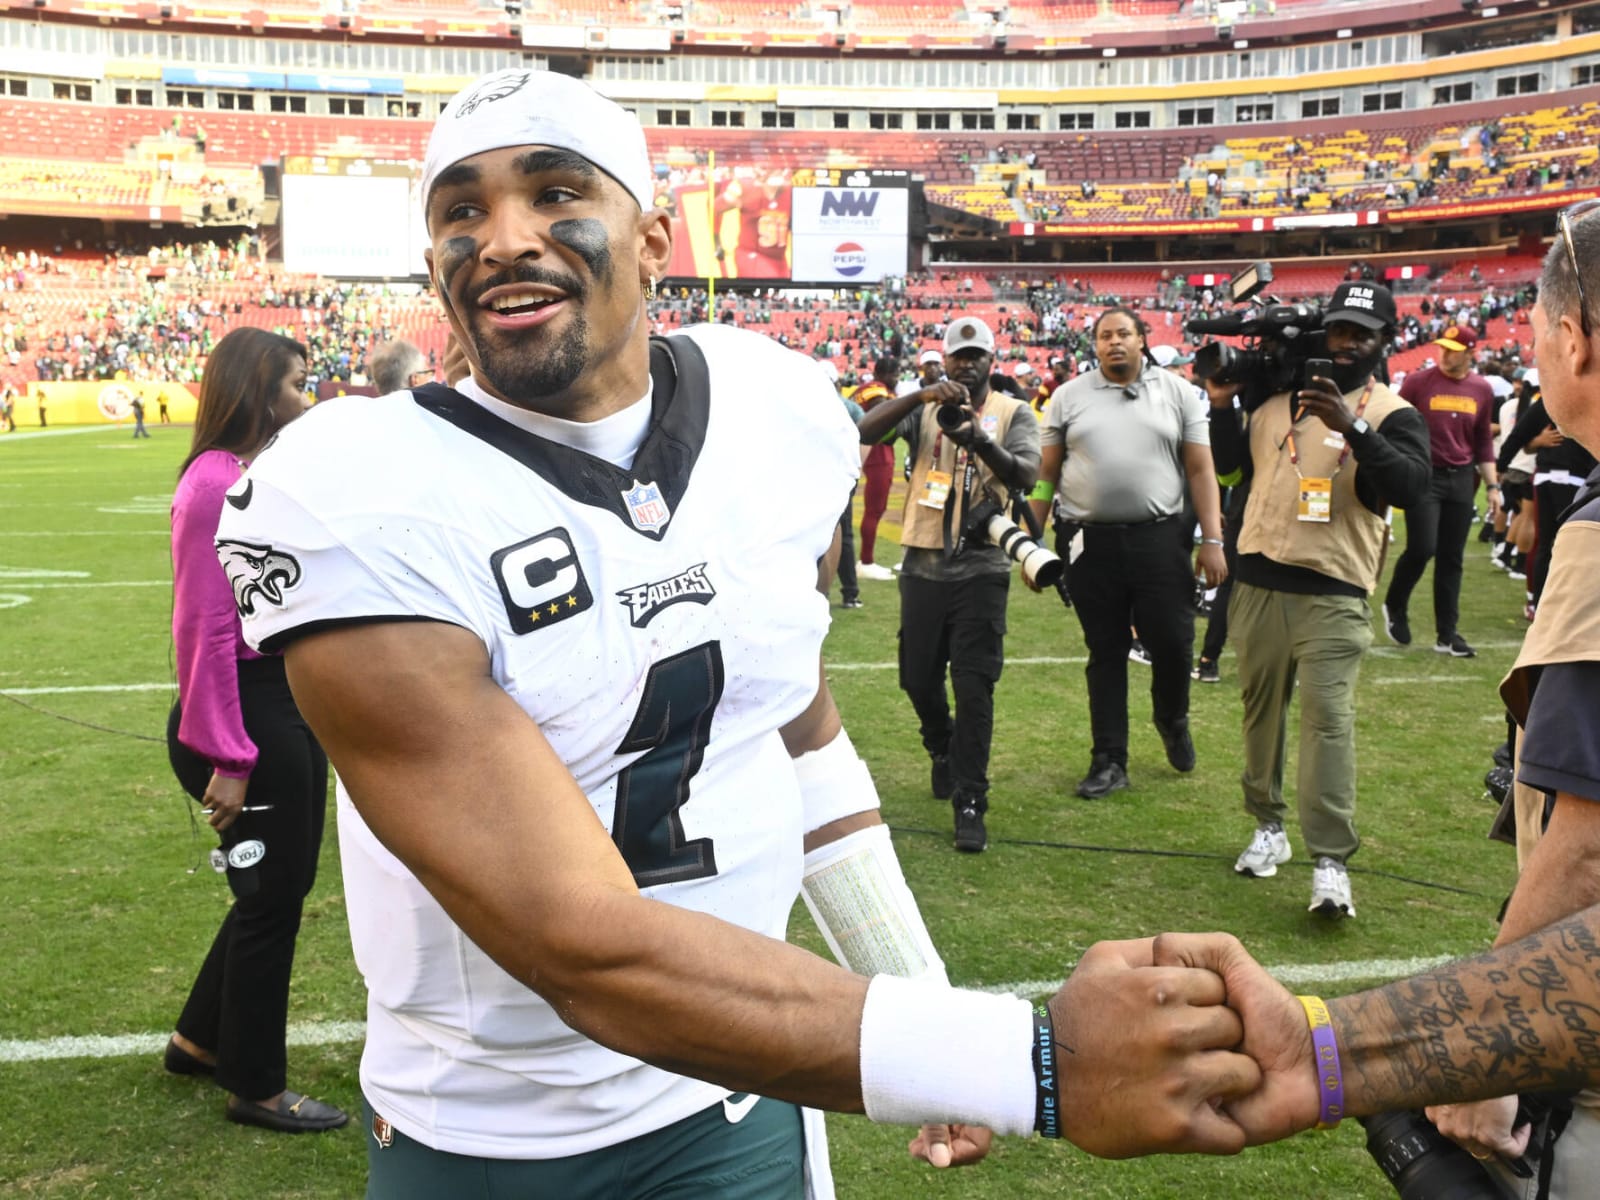 Eagles News: Jalen Hurts joins the NFL Superstar Club while Dak Prescott  gets kicked out - Bleeding Green Nation